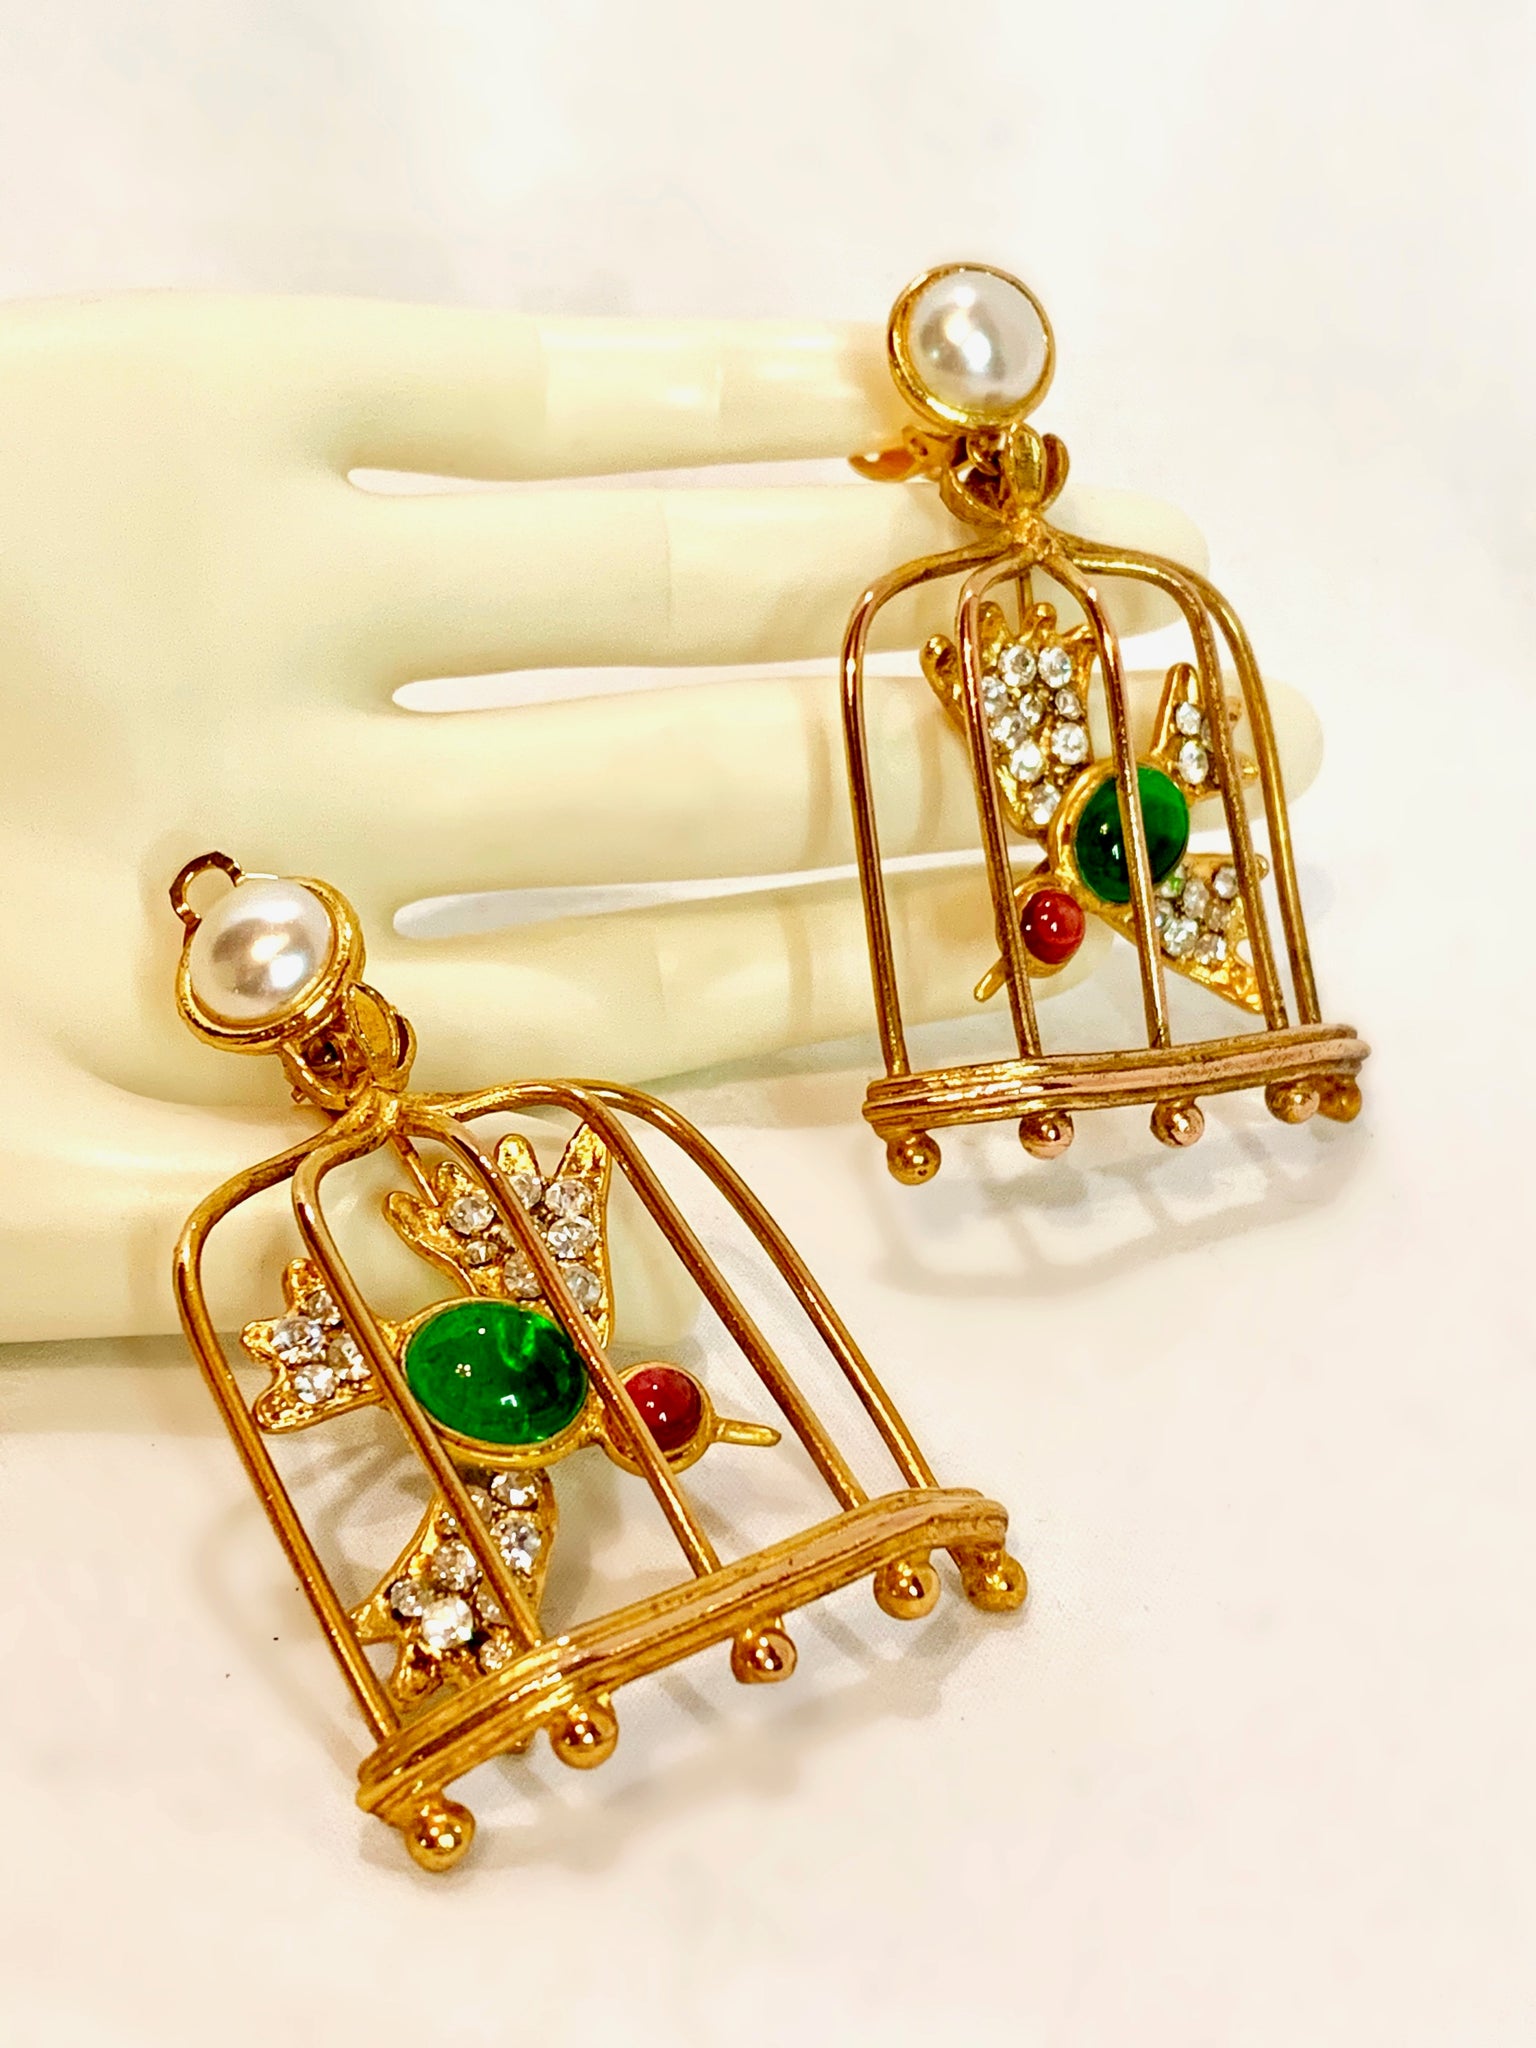 CHANEL ICONIC BIRD CAGE GRIPOIX GLASS BIRDS PEARL EARRINGS – The Paris  Mademoiselle